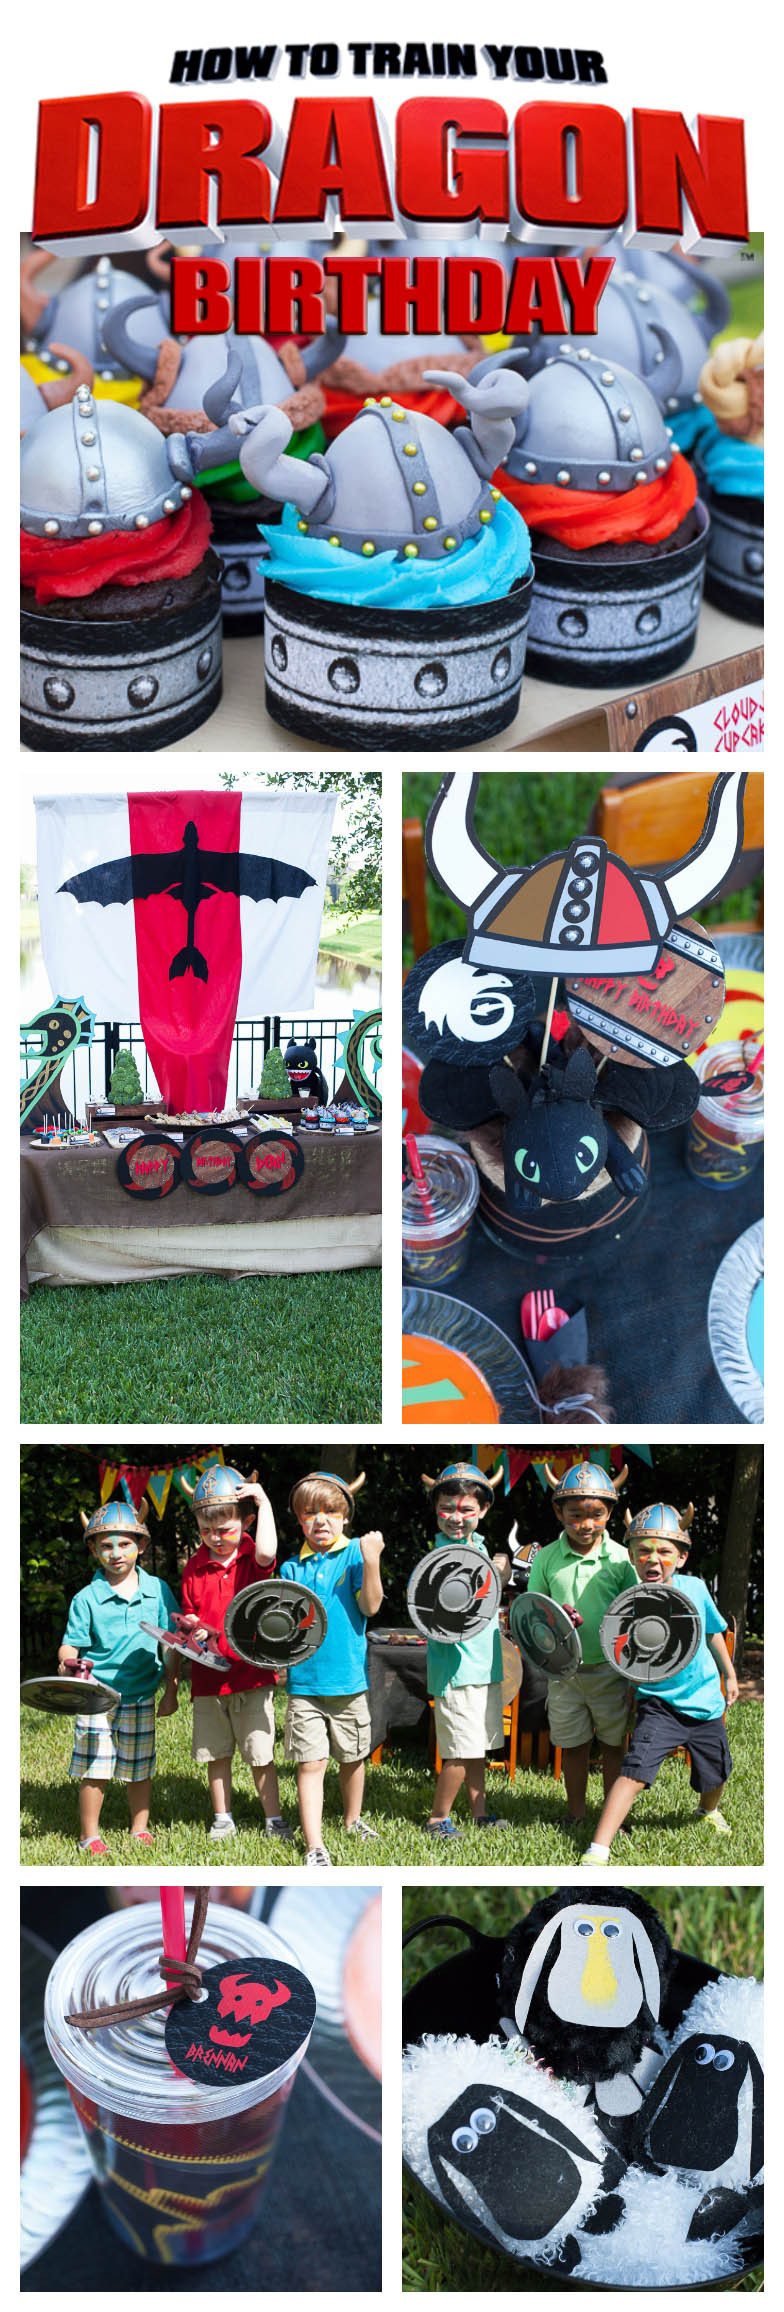 How To Train Your Dragon Birthday Party
 How to Train Your Dragon Birthday Party Part II Party